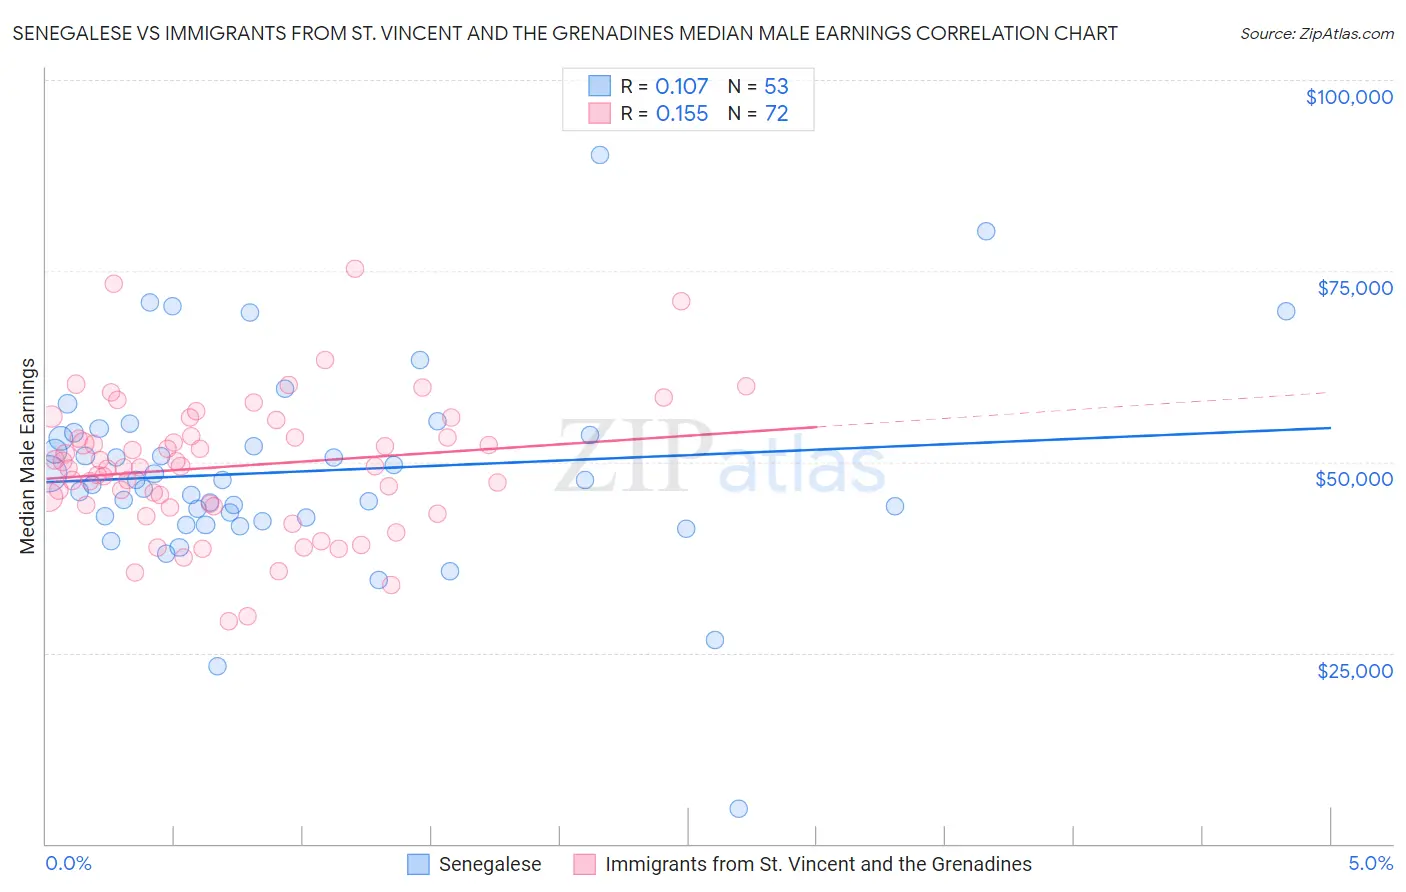 Senegalese vs Immigrants from St. Vincent and the Grenadines Median Male Earnings